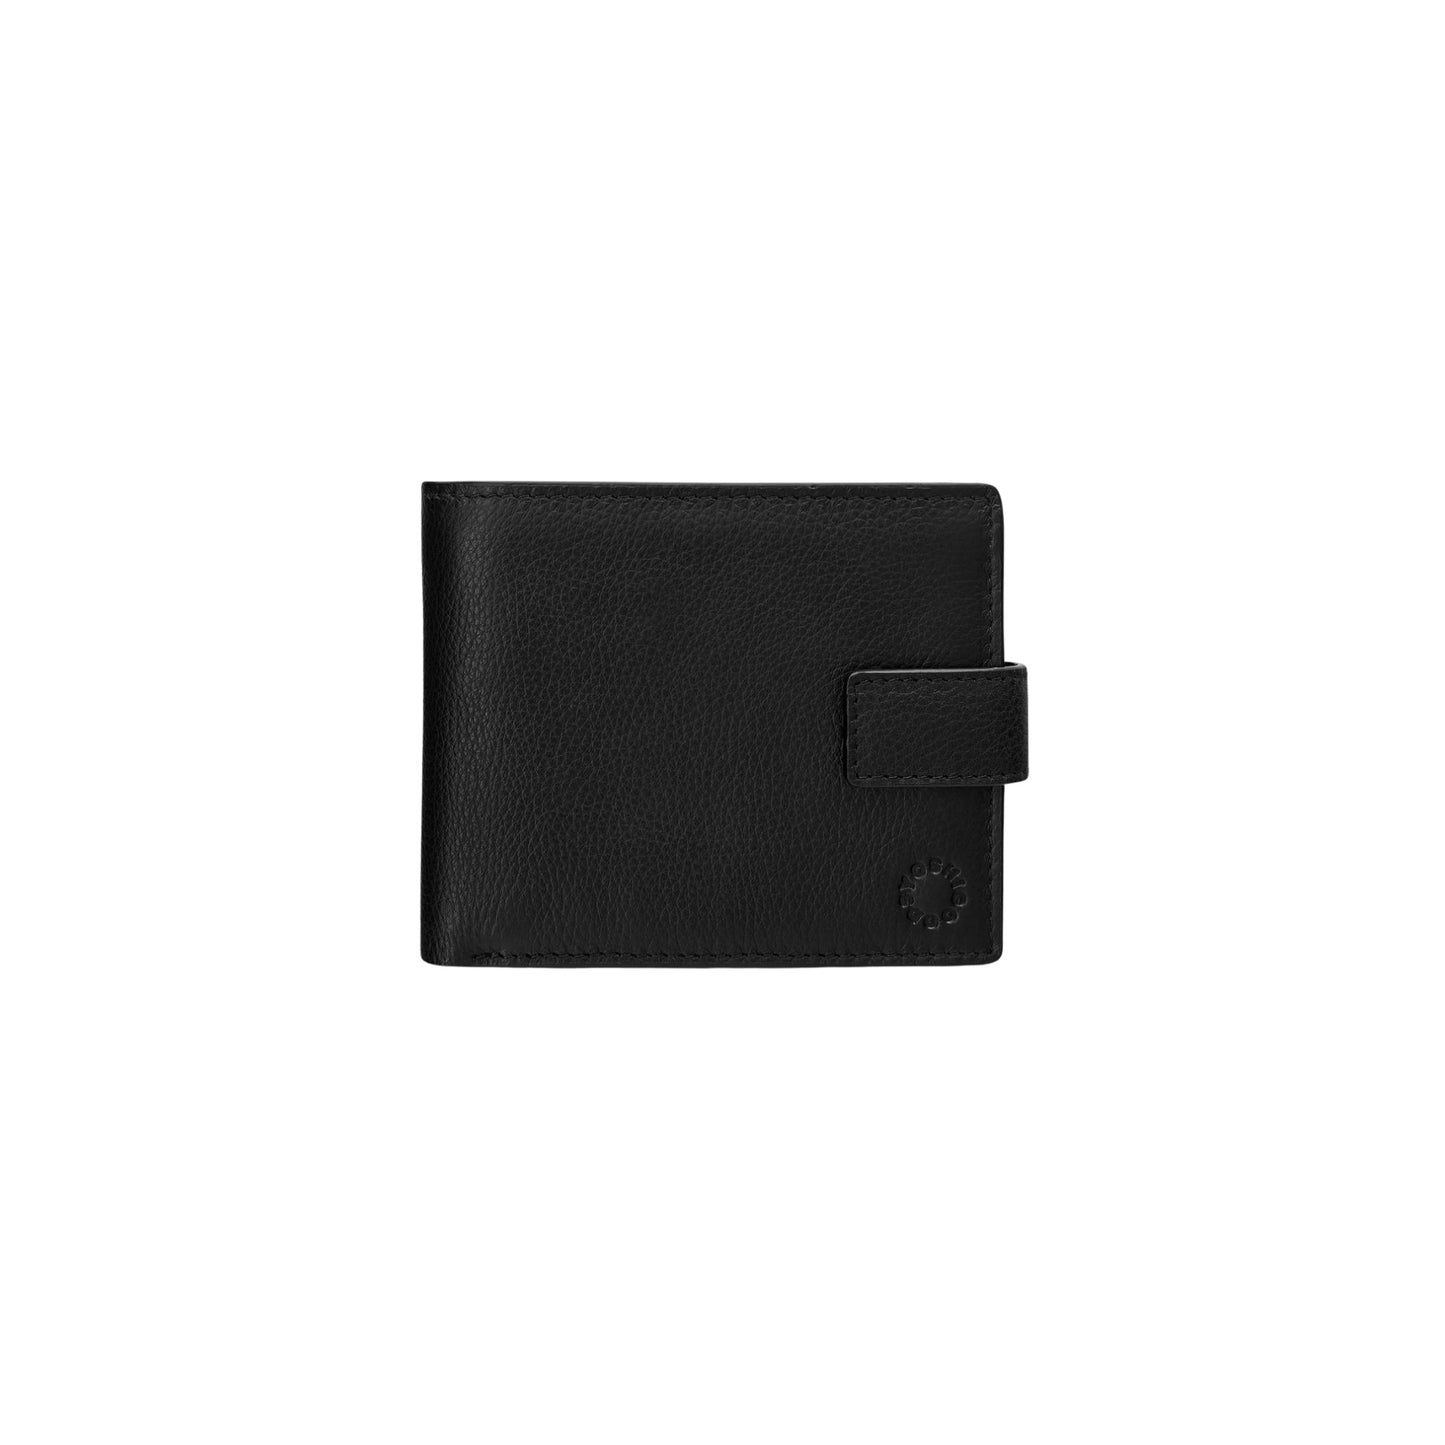 Men's Leather Wallet with Tab - Black